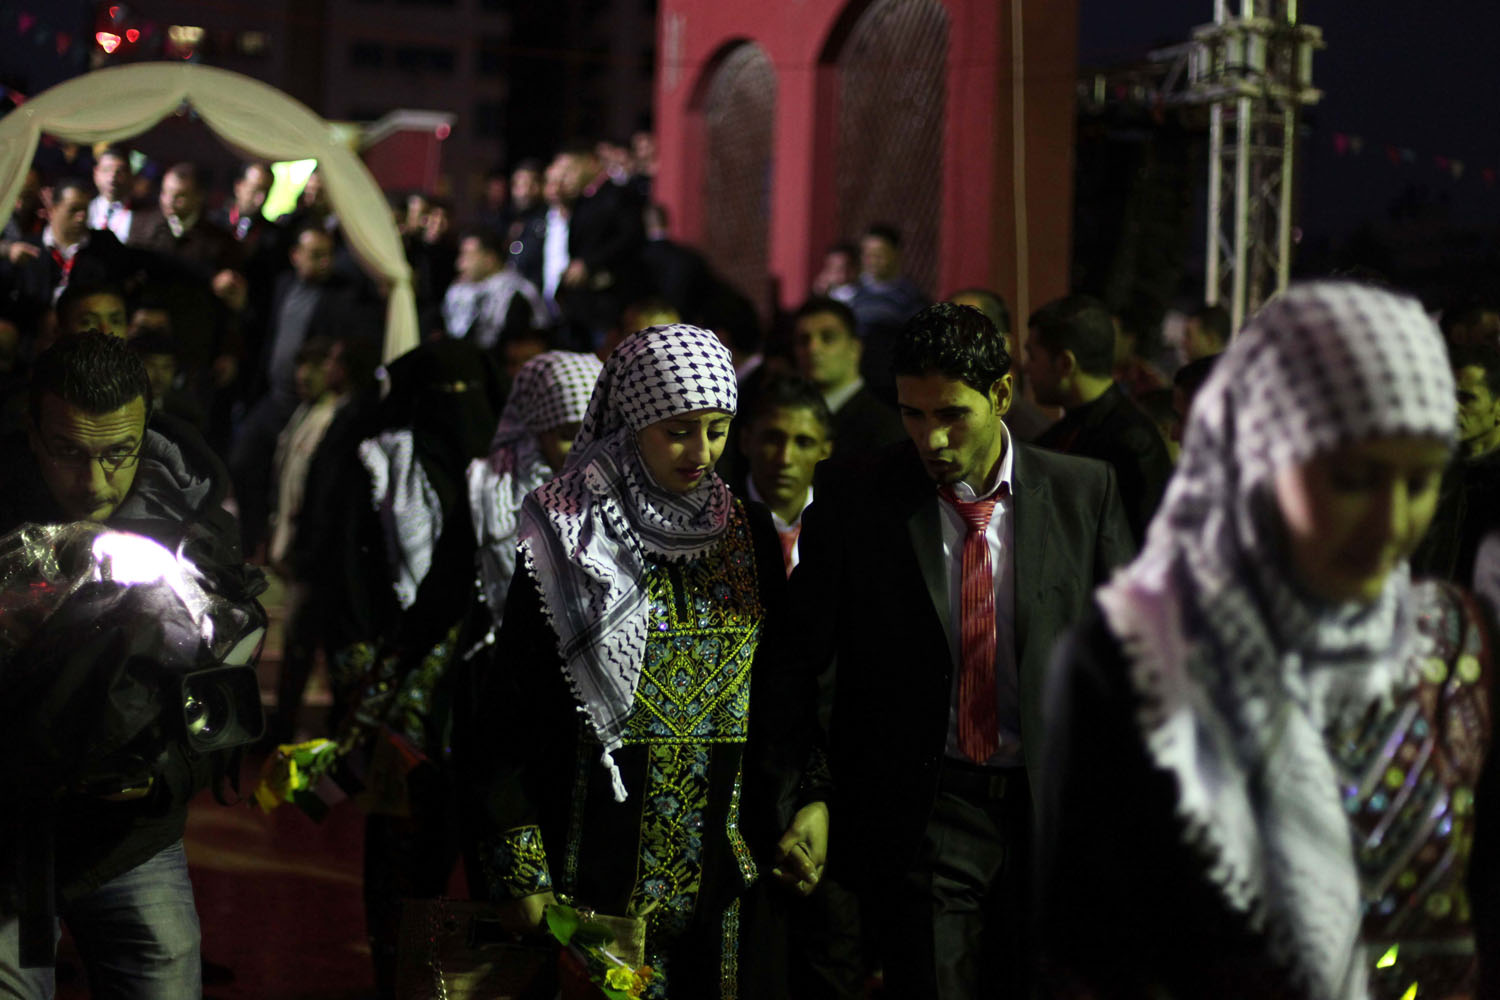 PALESTINIAN COUPLES TAKE PART IN A MASS WEDDING CEREMONY IN GAZA CITY